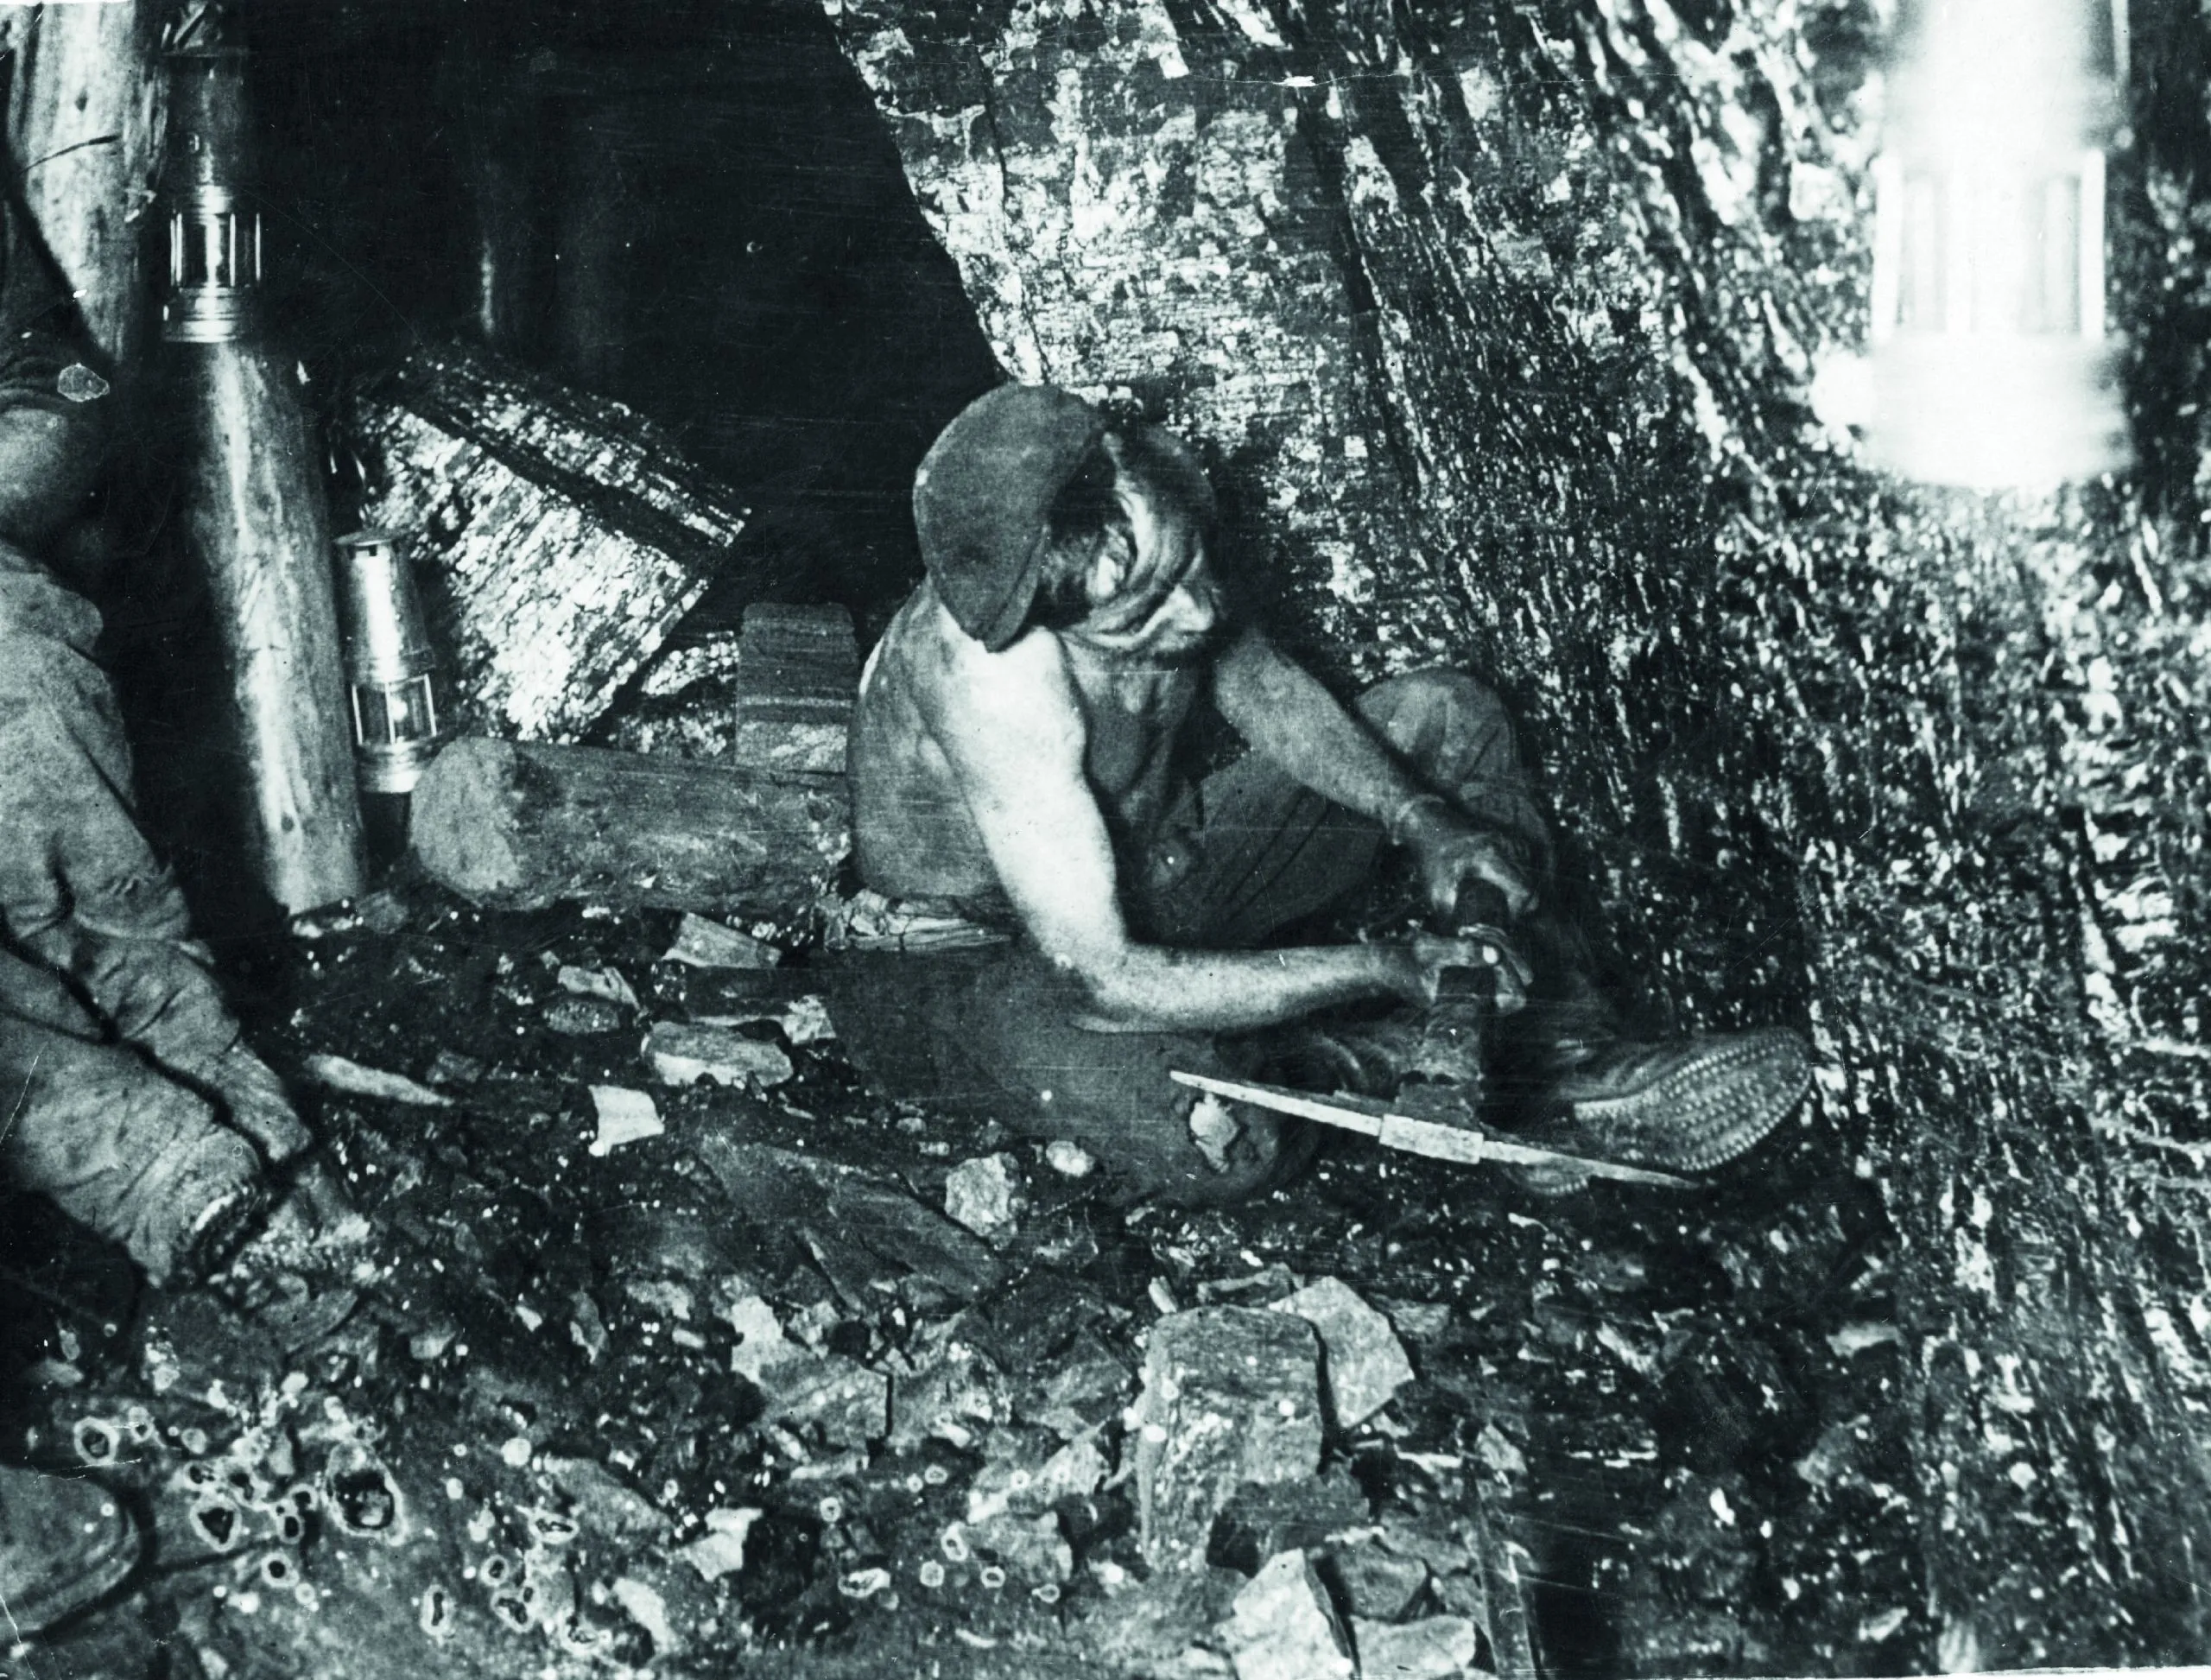  Coal miners. Writing about your ancestors' occupations can enhance your family history